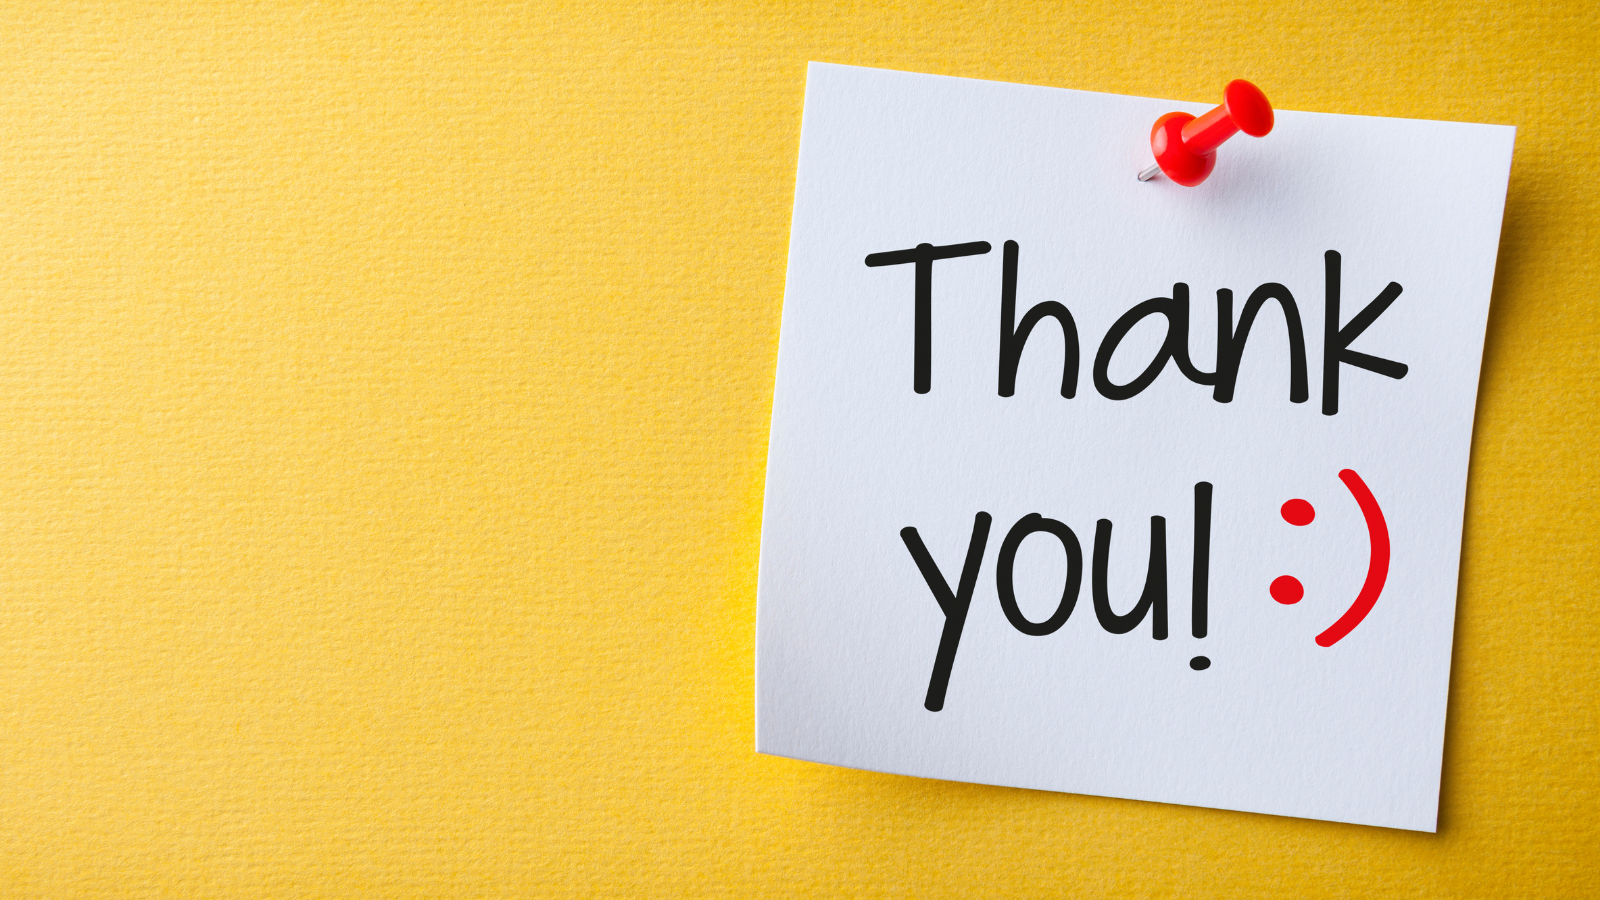 Empowering Employee Recognition: Inspiring Examples of Appreciation Messages